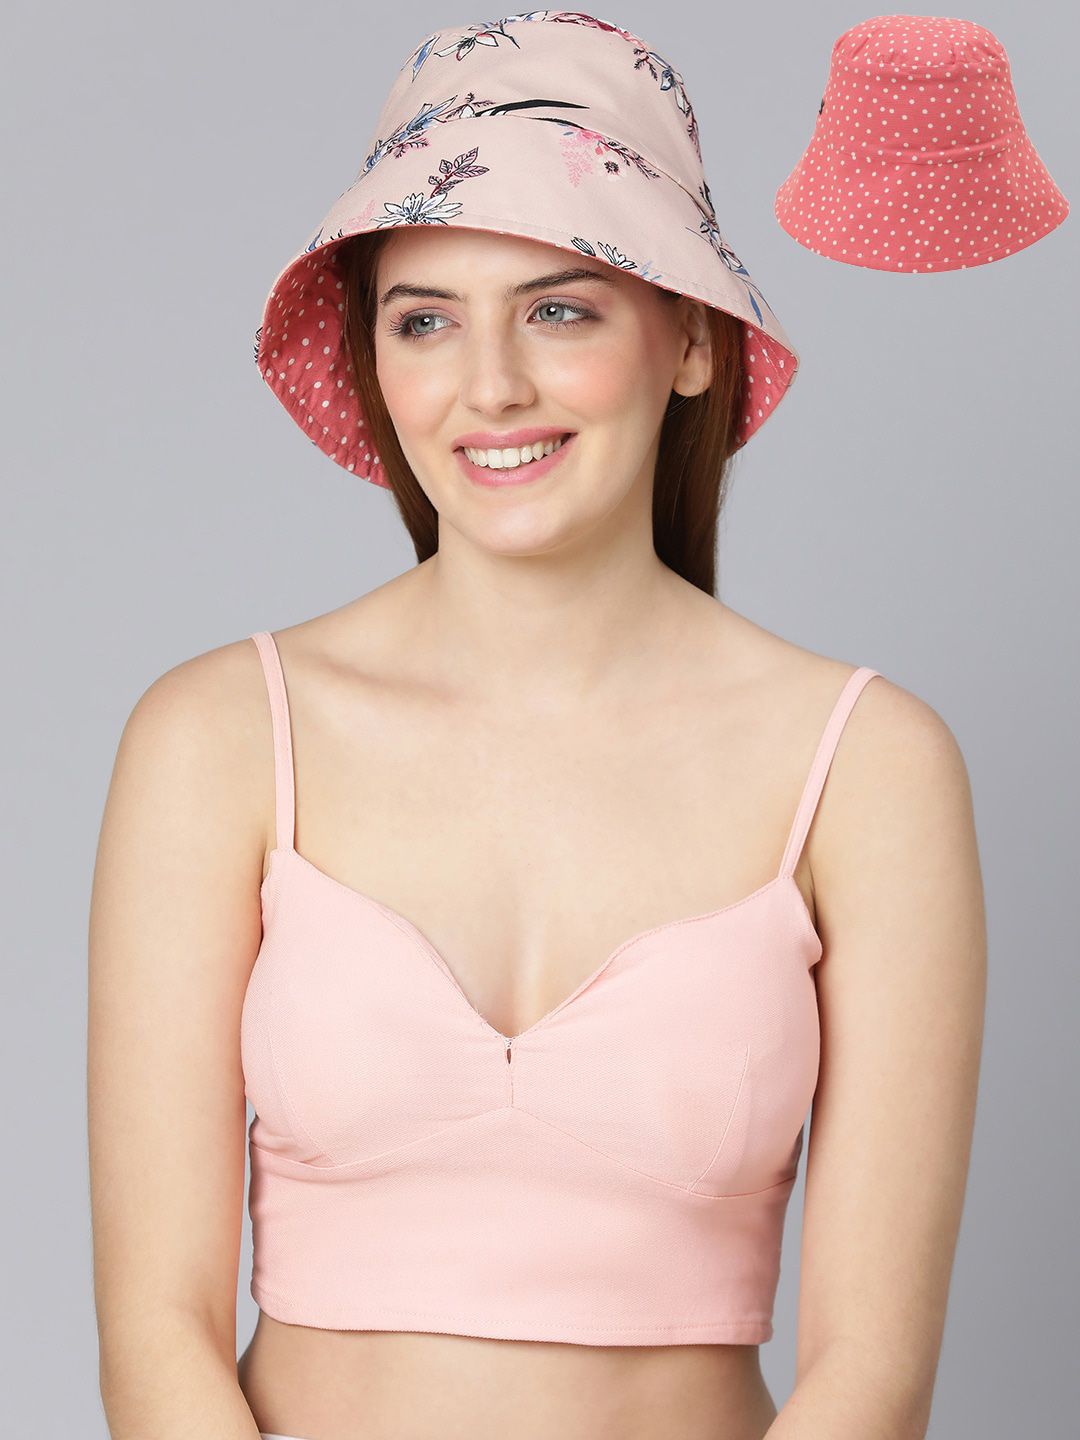 Oxolloxo Women Peach & Red Printed Reversible Sun Hat Price in India